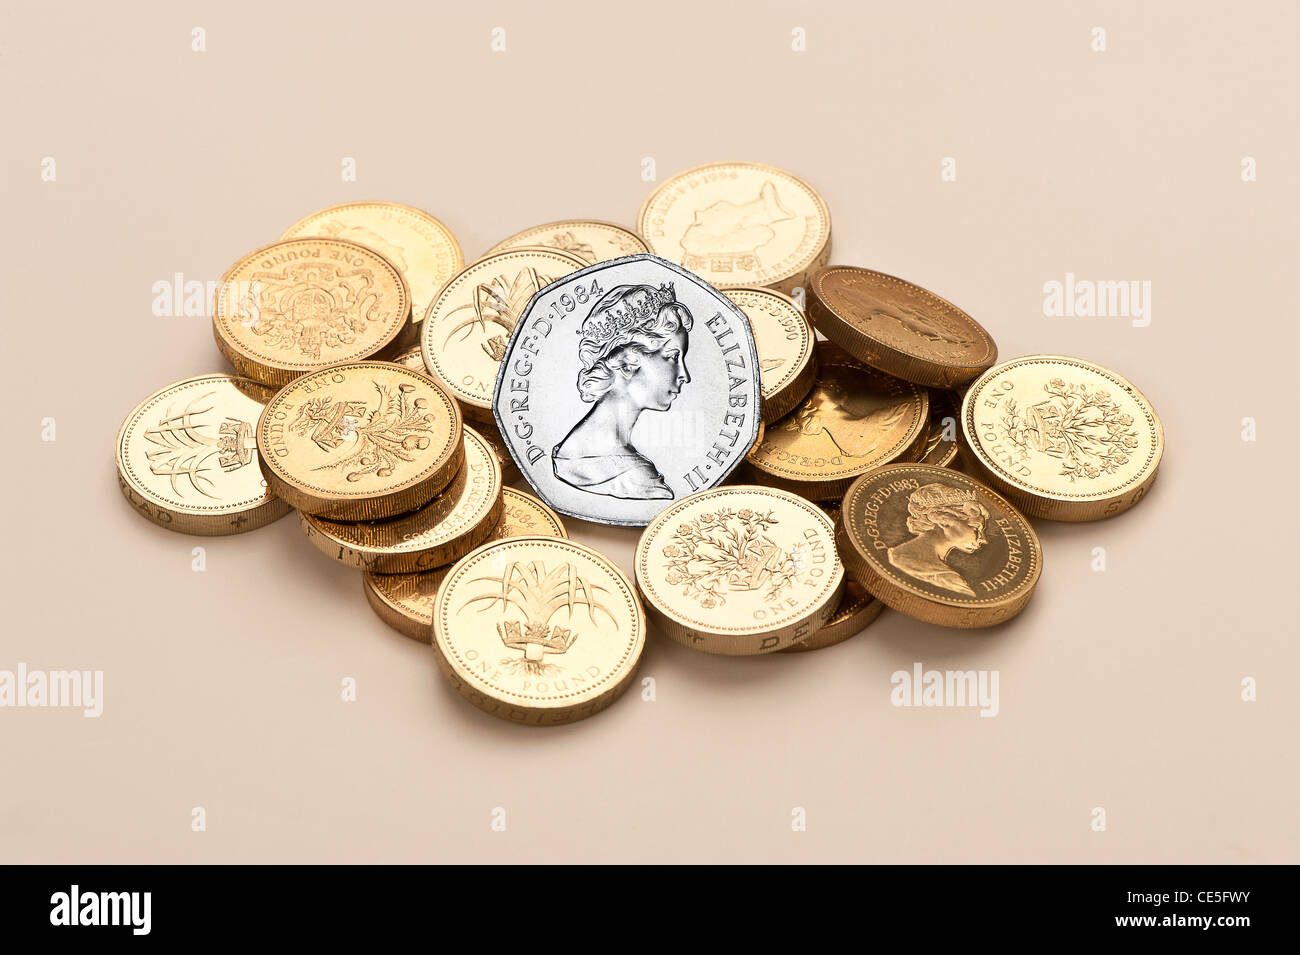 A pile of UK £coins with a 50p coin Stock Photo